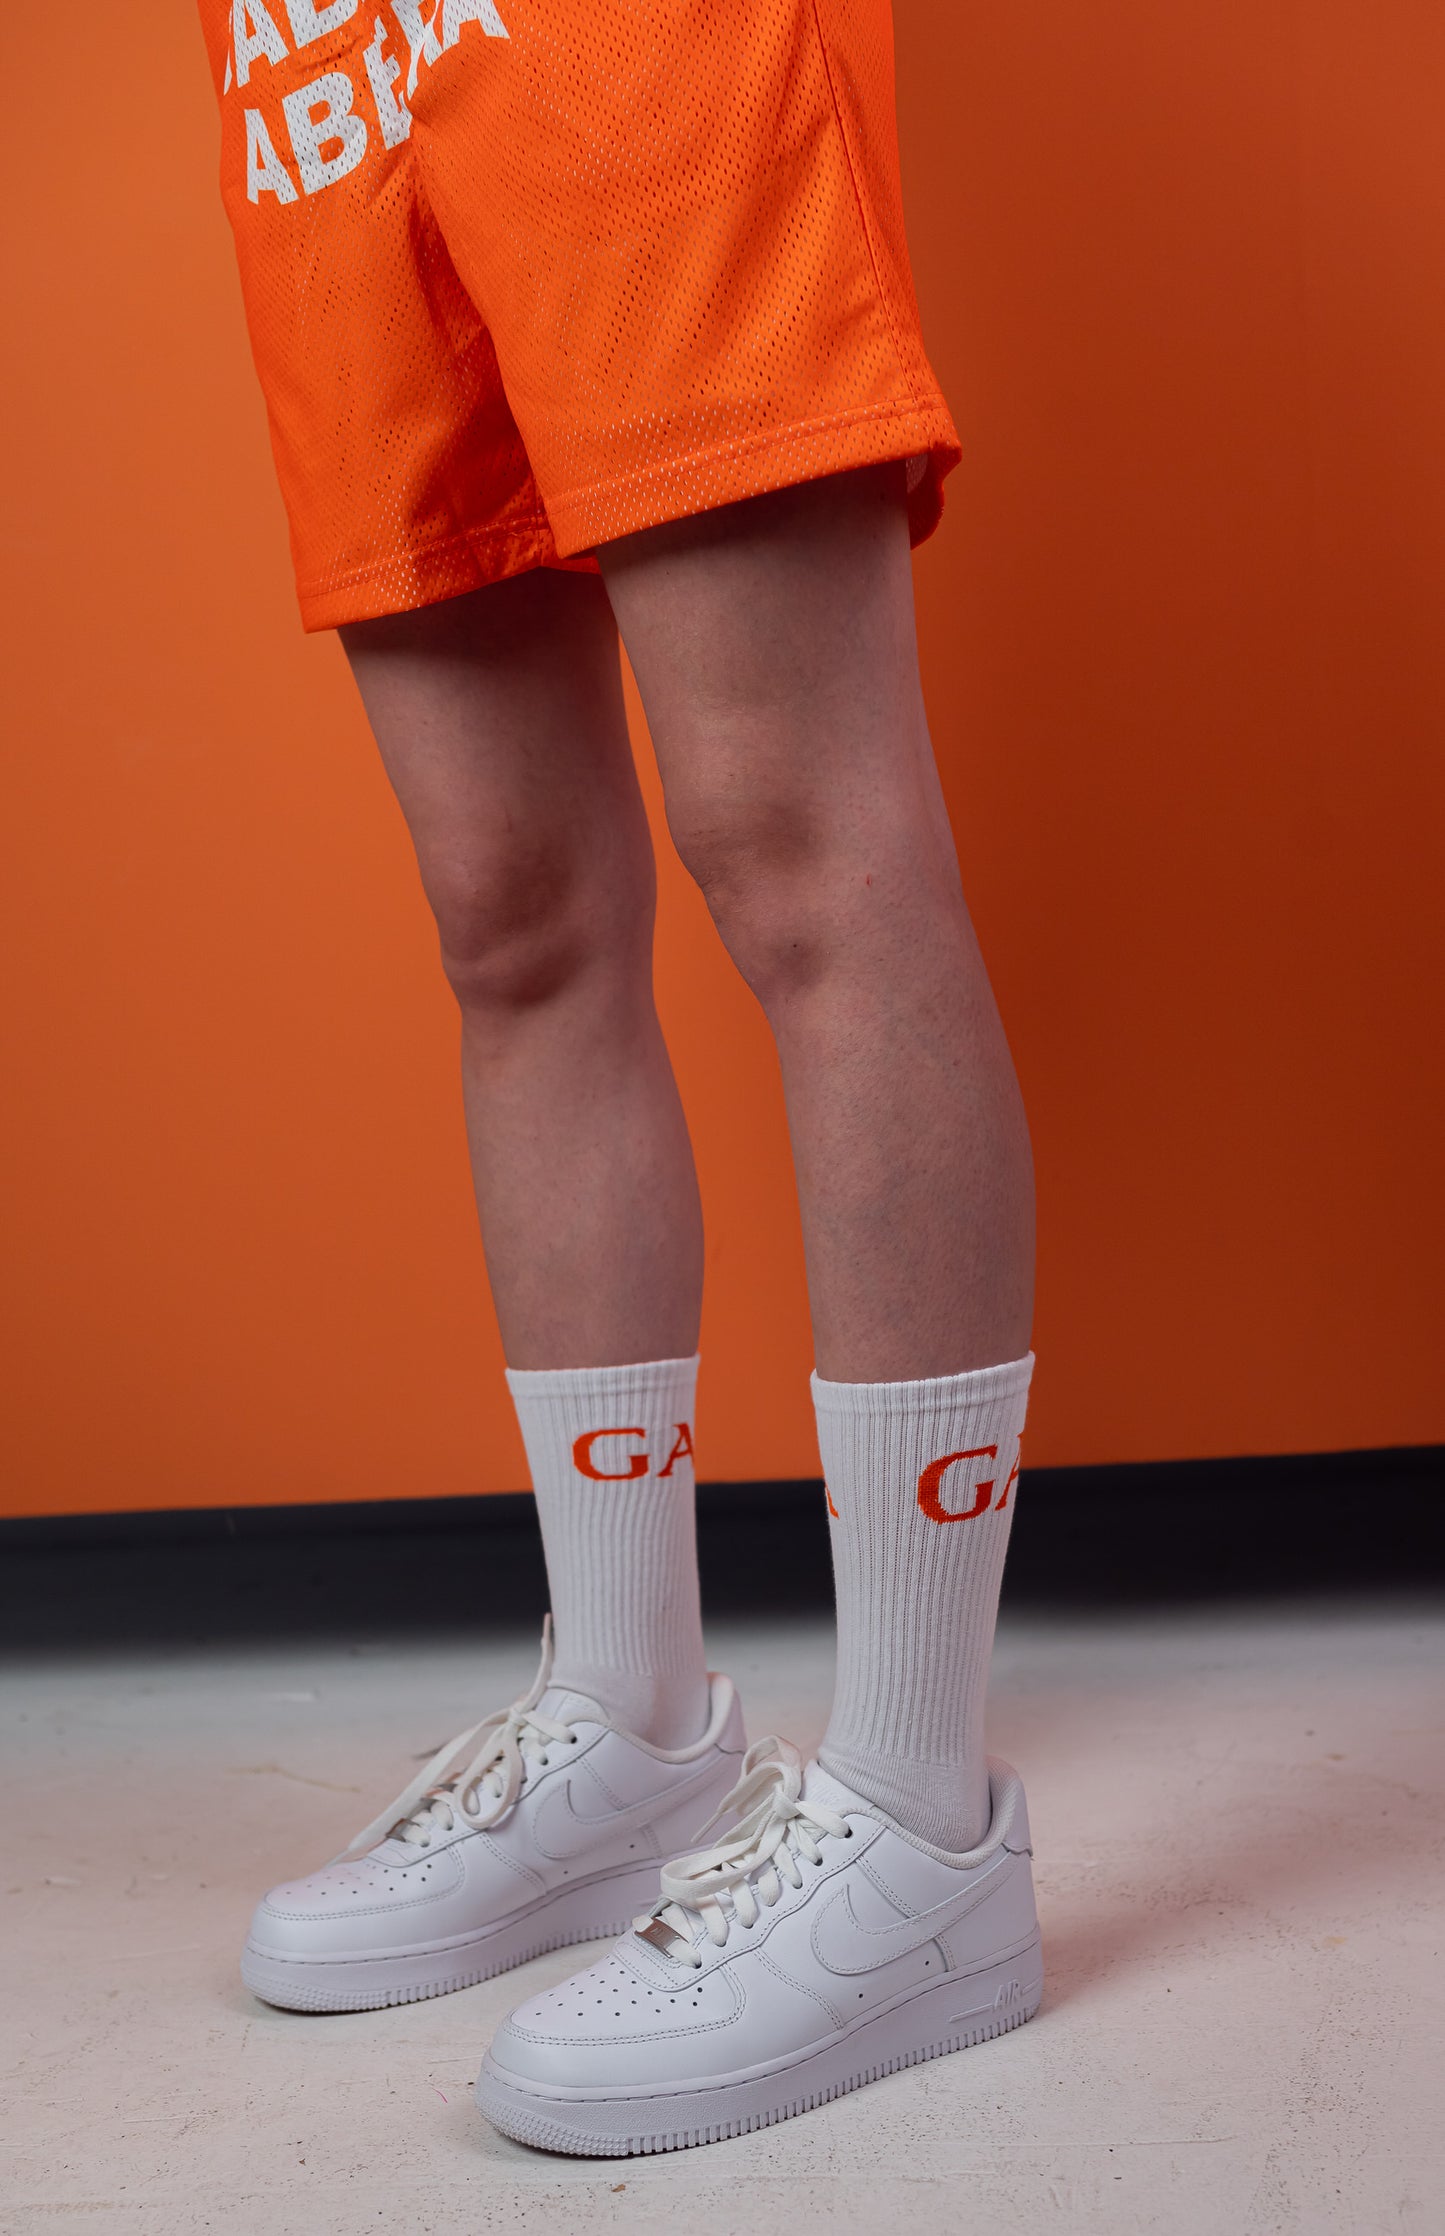 Model wearing A pair of socks with capital letters GA in orange 